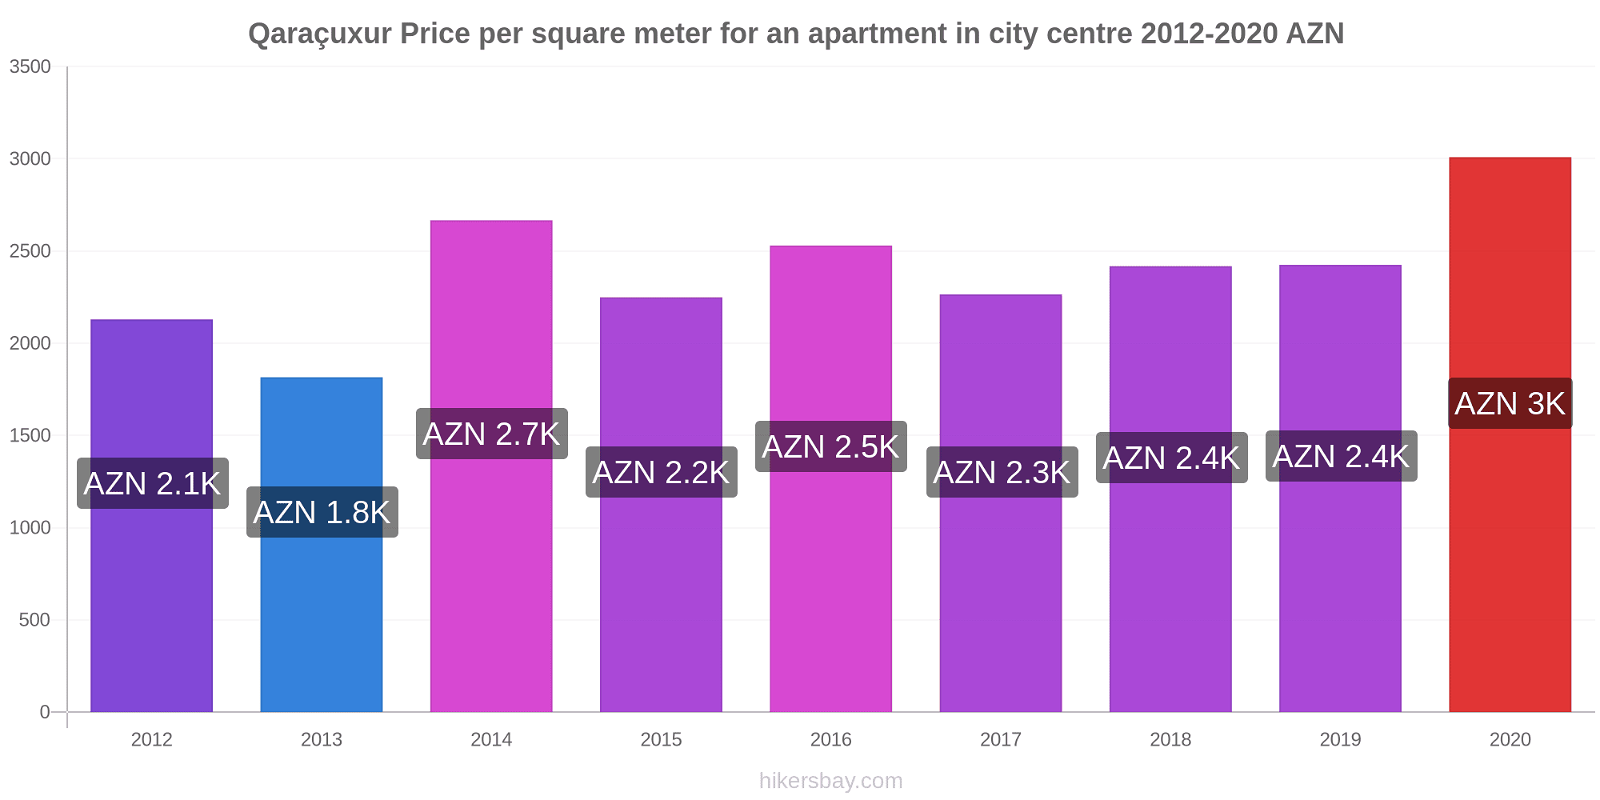 Qaraçuxur price changes Price per square meter for an apartment in city centre hikersbay.com